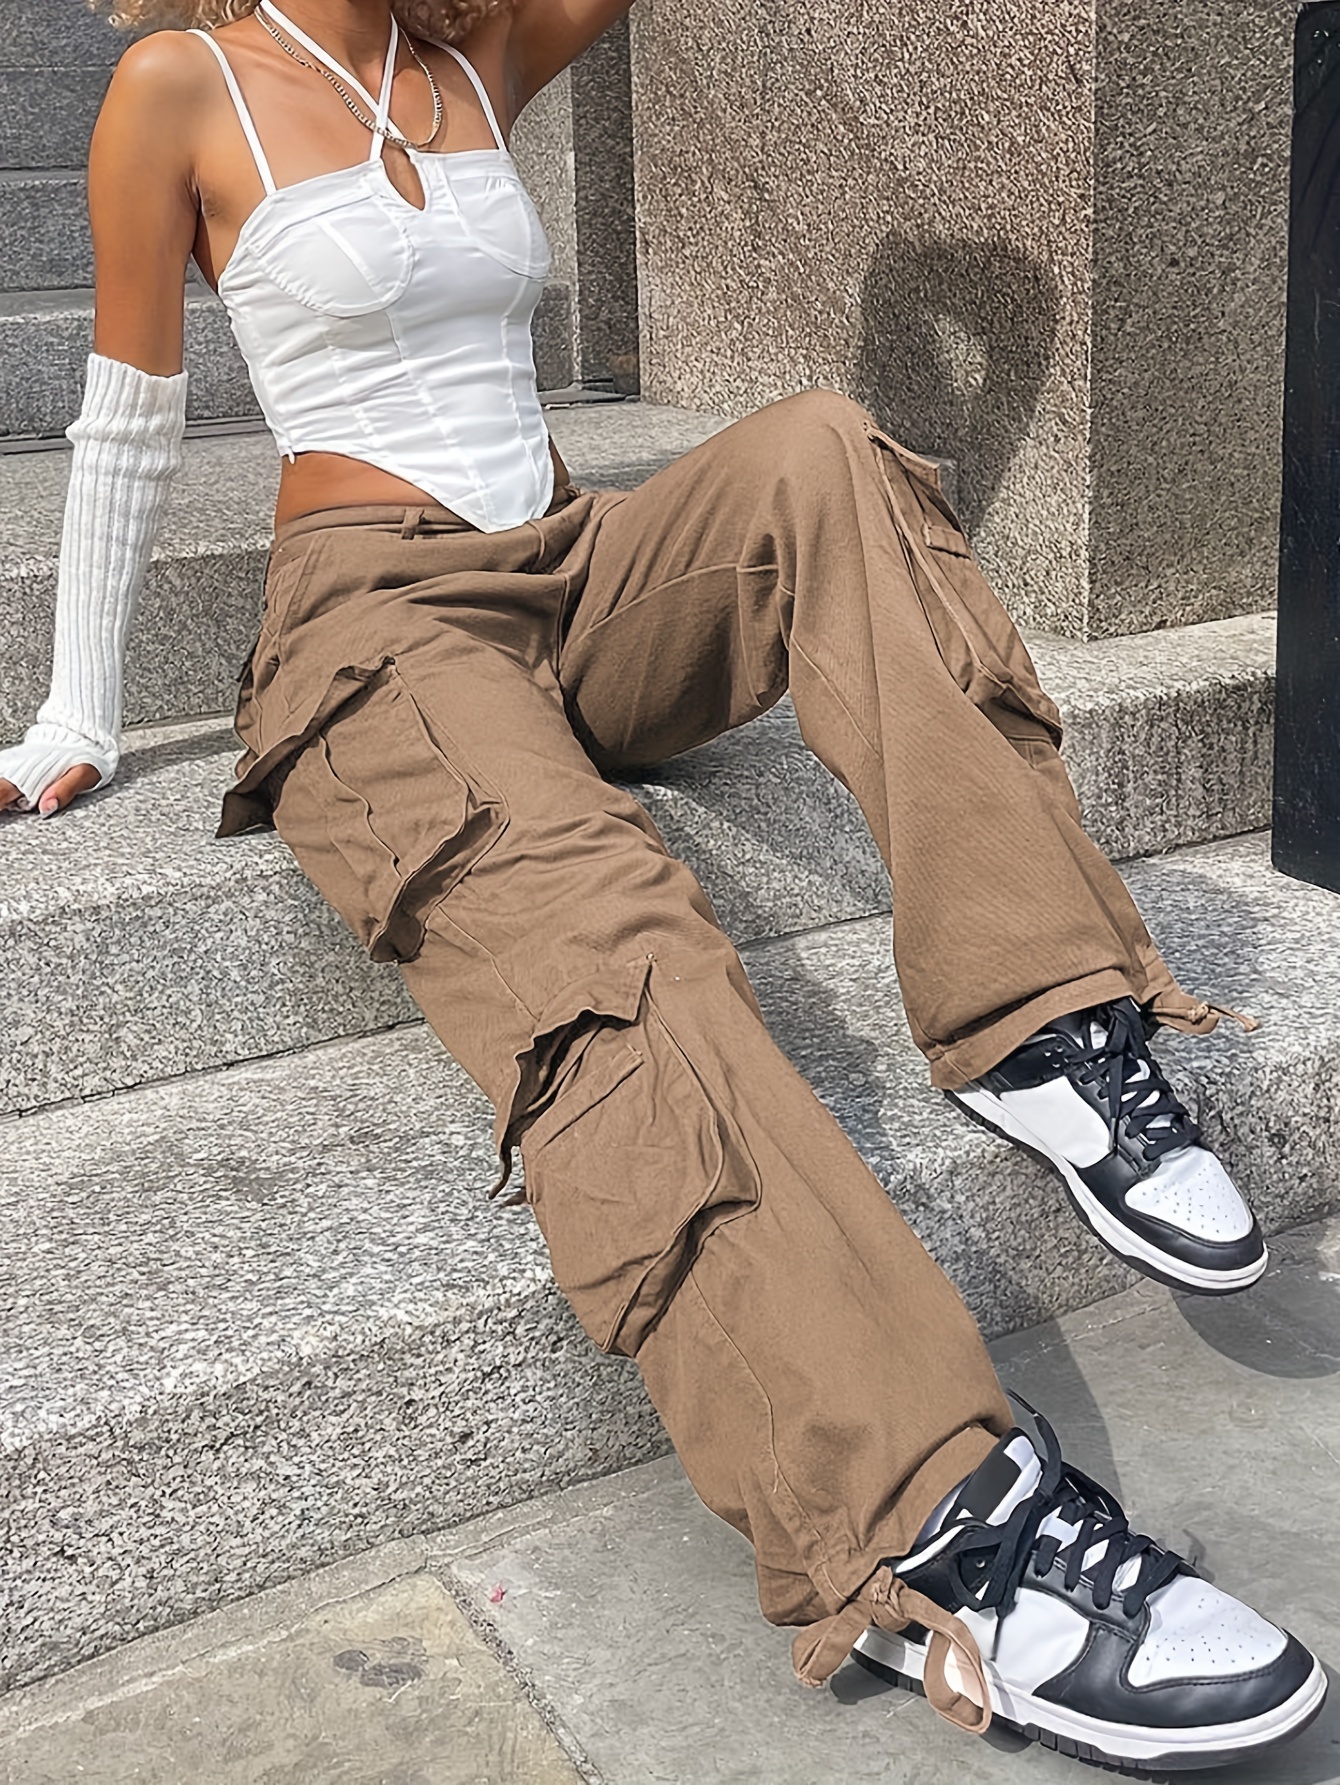 Army Green Cargo Pants, Flap Pockets High Waist Loose Fit Non-Stretch  Casual Denim Pants, Y2K Kpop Vintage Style, Women's Denim Jeans & Clothing